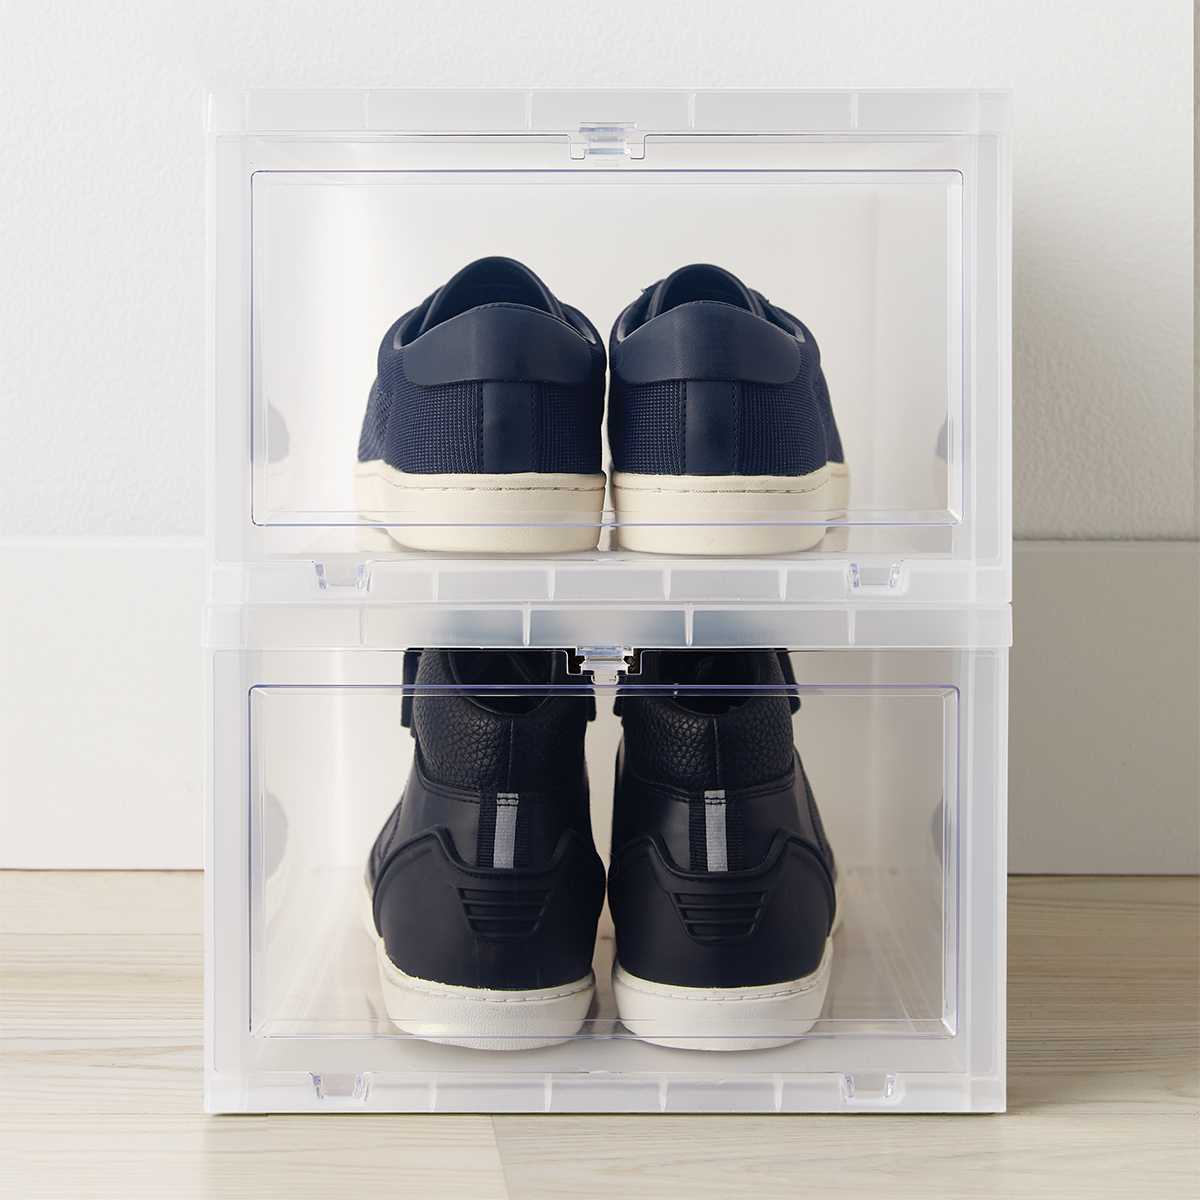 Drop-Front Shoe Boxes | The Container Store